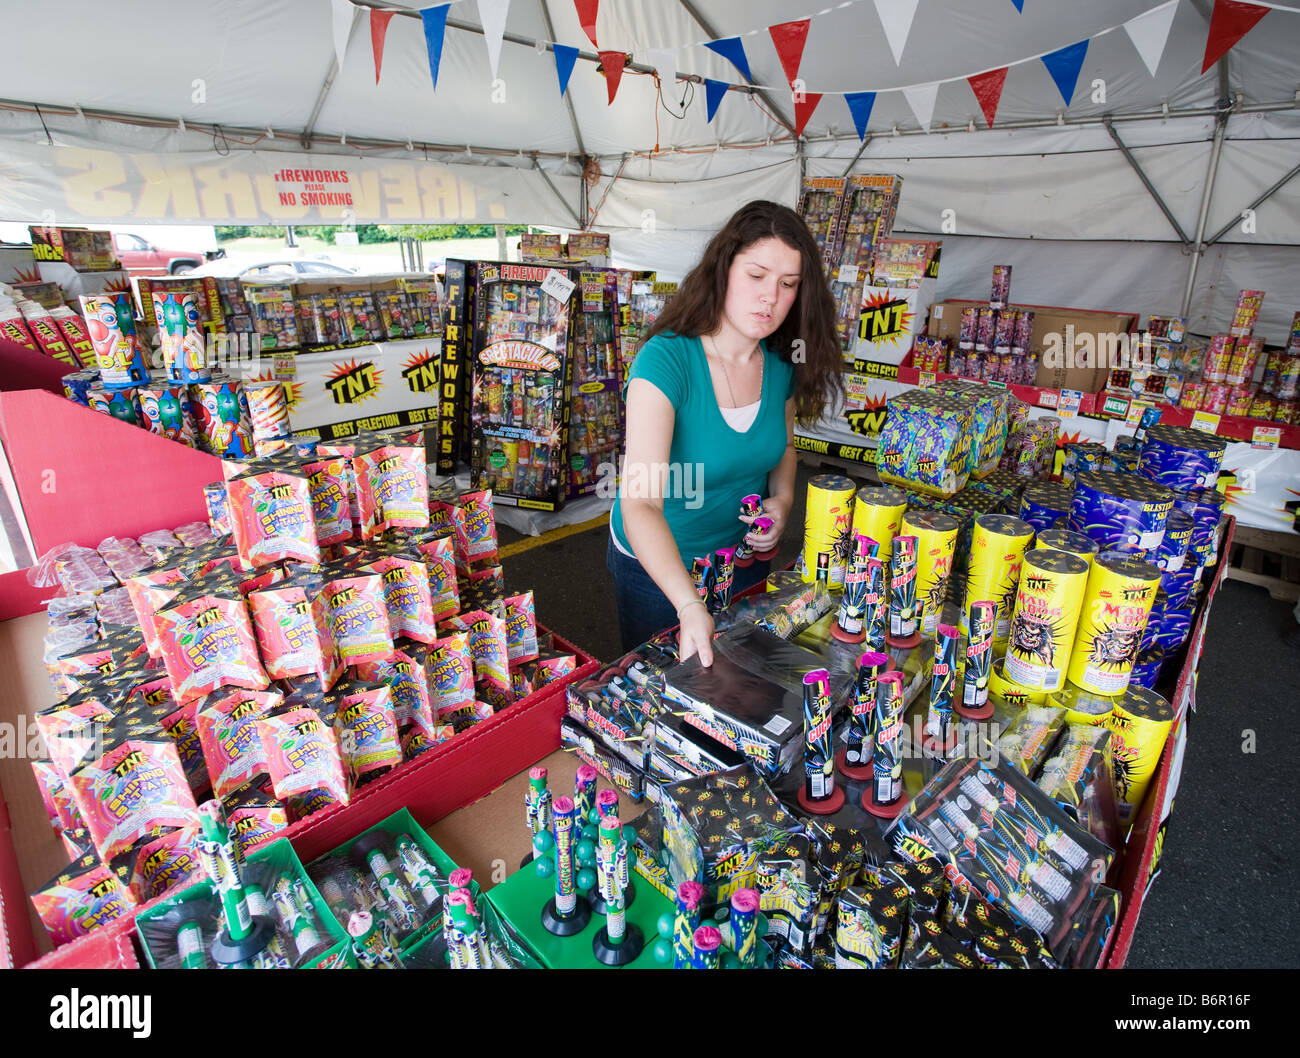 A young woman sells legal fireworks in a roadside stand tent in Milford Connecticut USA Stock Photo